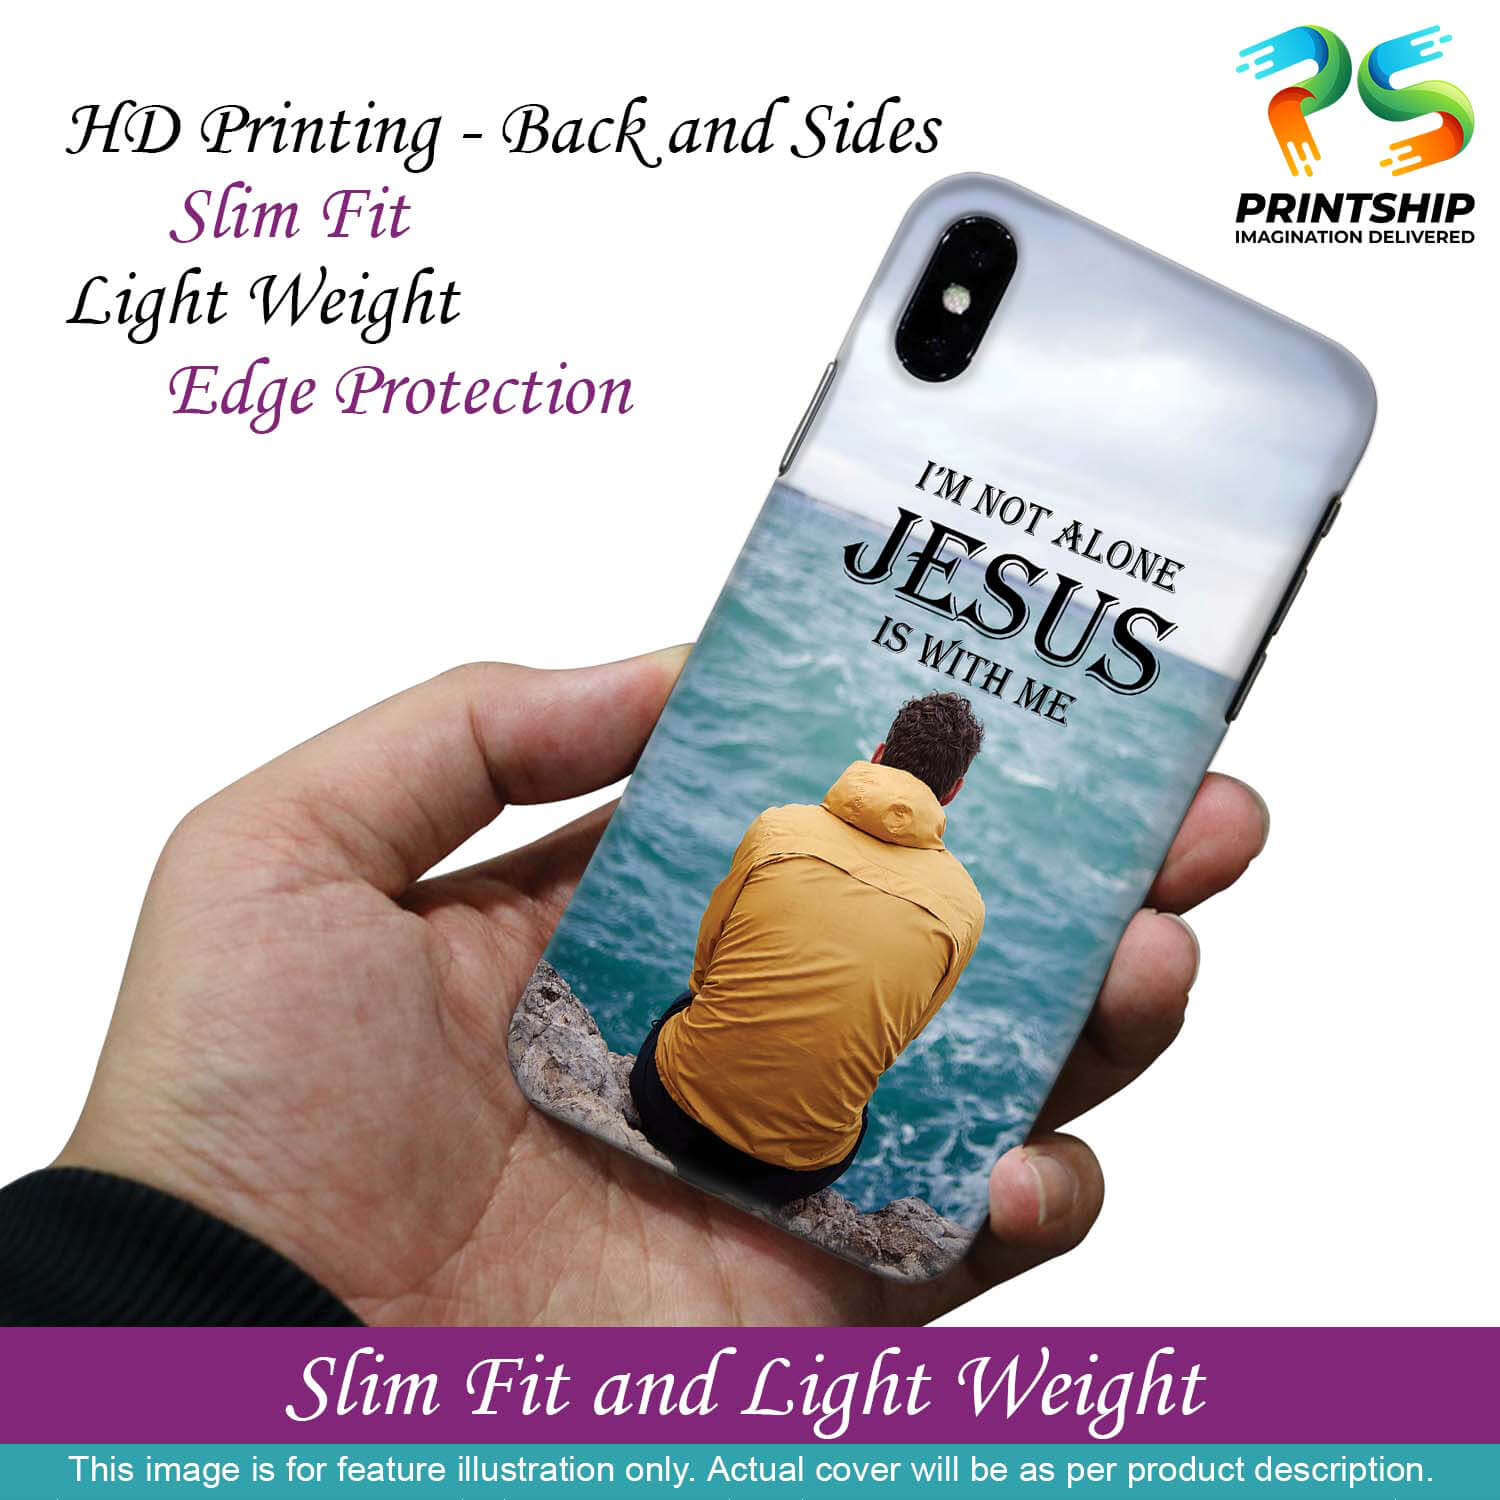 W0007-Jesus is with Me Back Cover for Oppo A16K